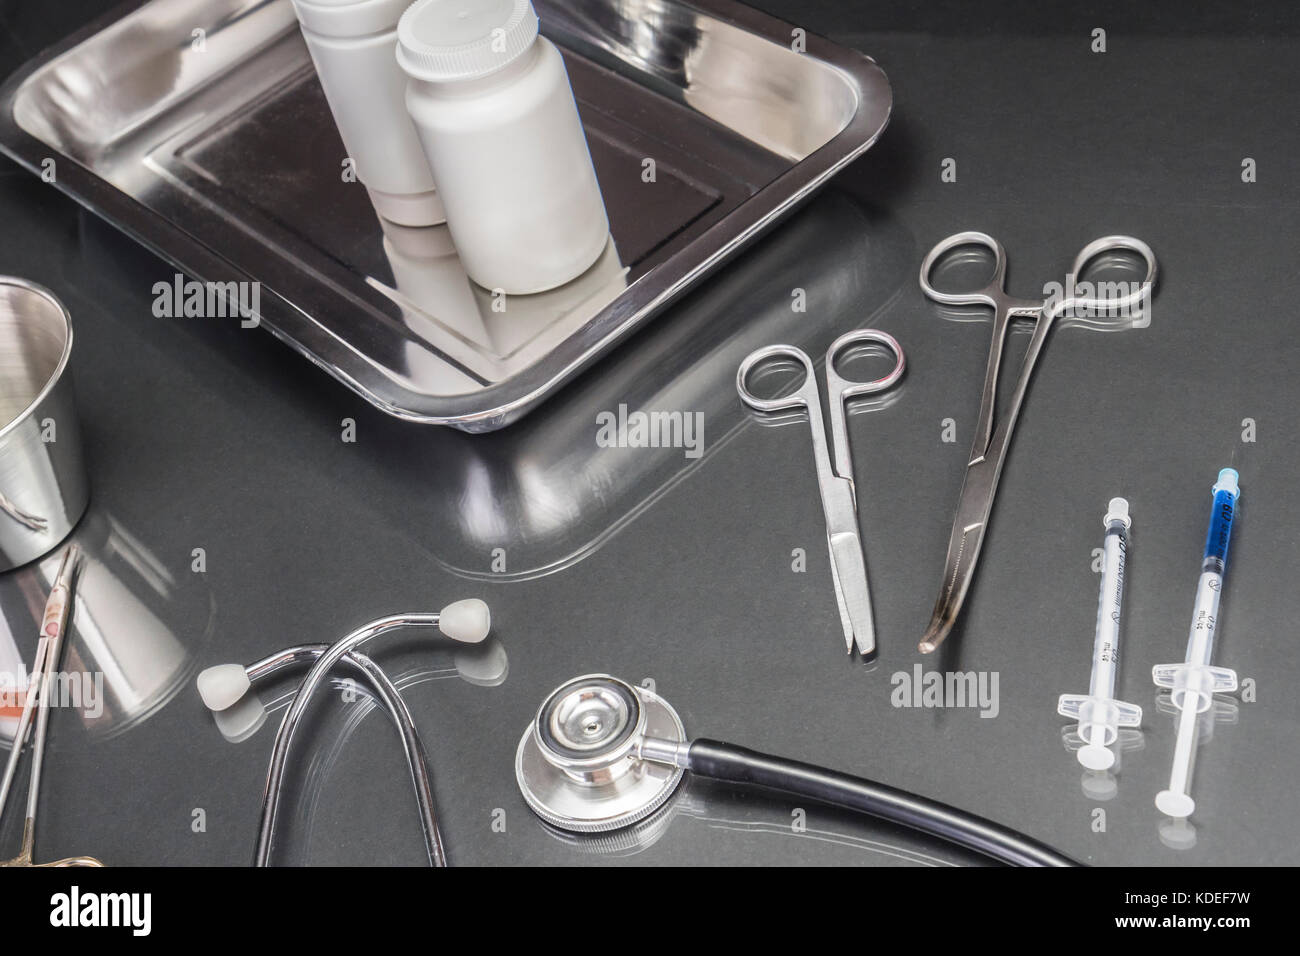 Instrumental surgical in operating room, conceptual image Stock Photo